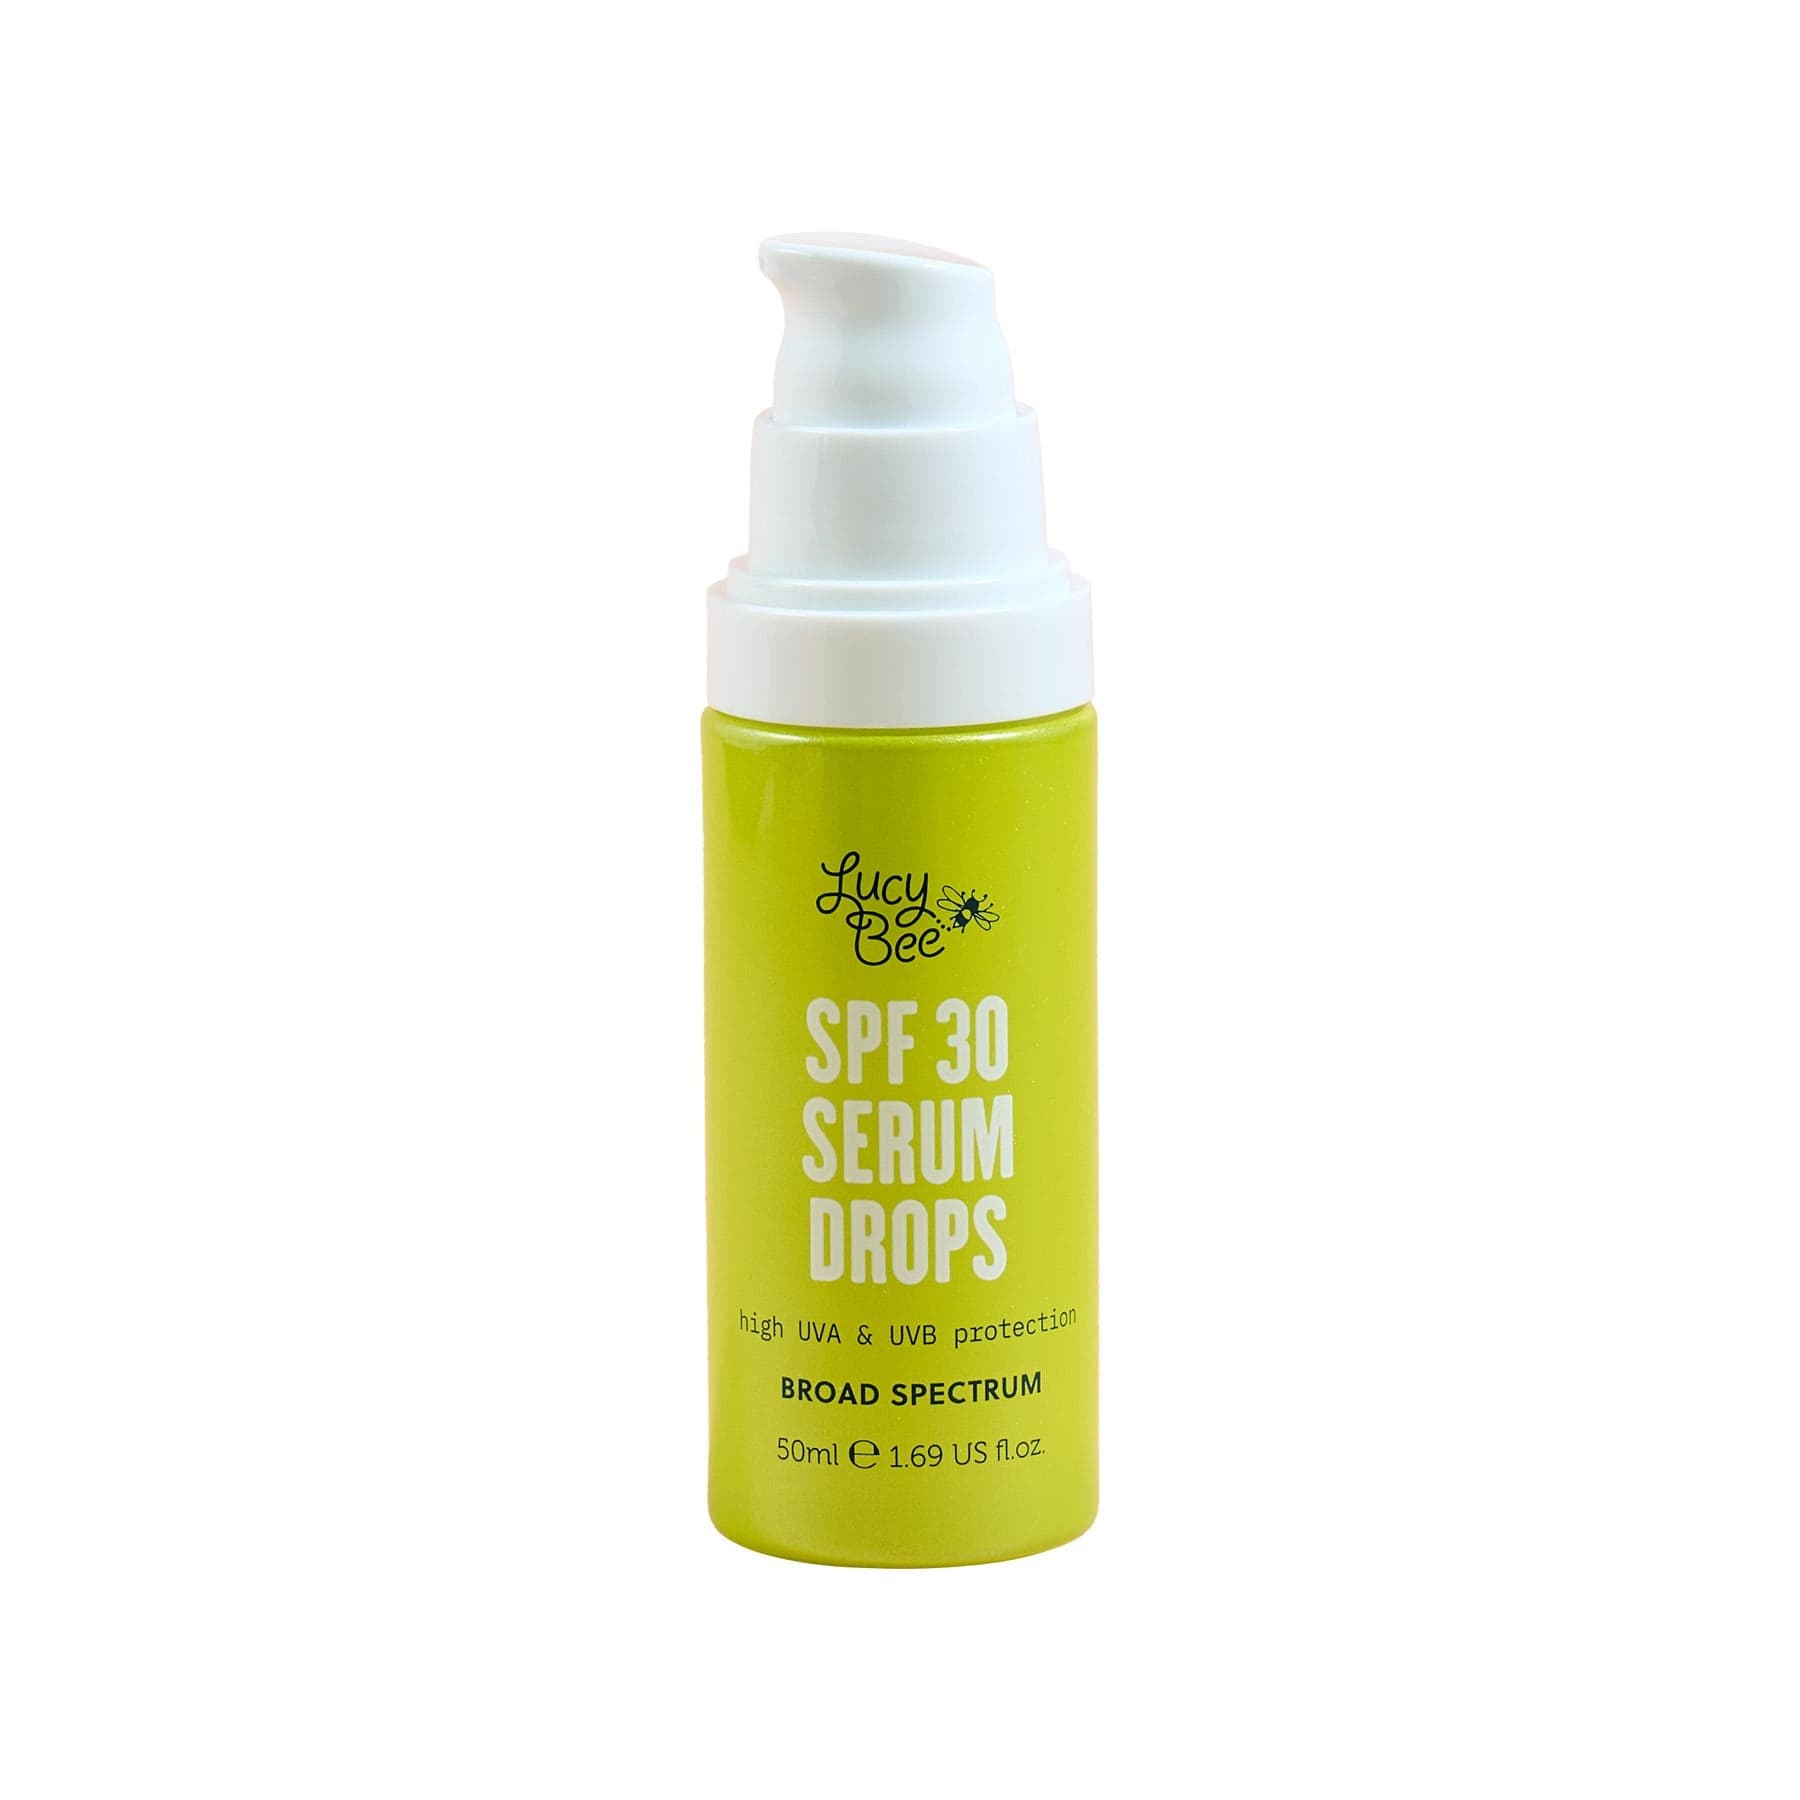 2-in-1 hydrating face serum with broad spectrum SPF 30 50ml